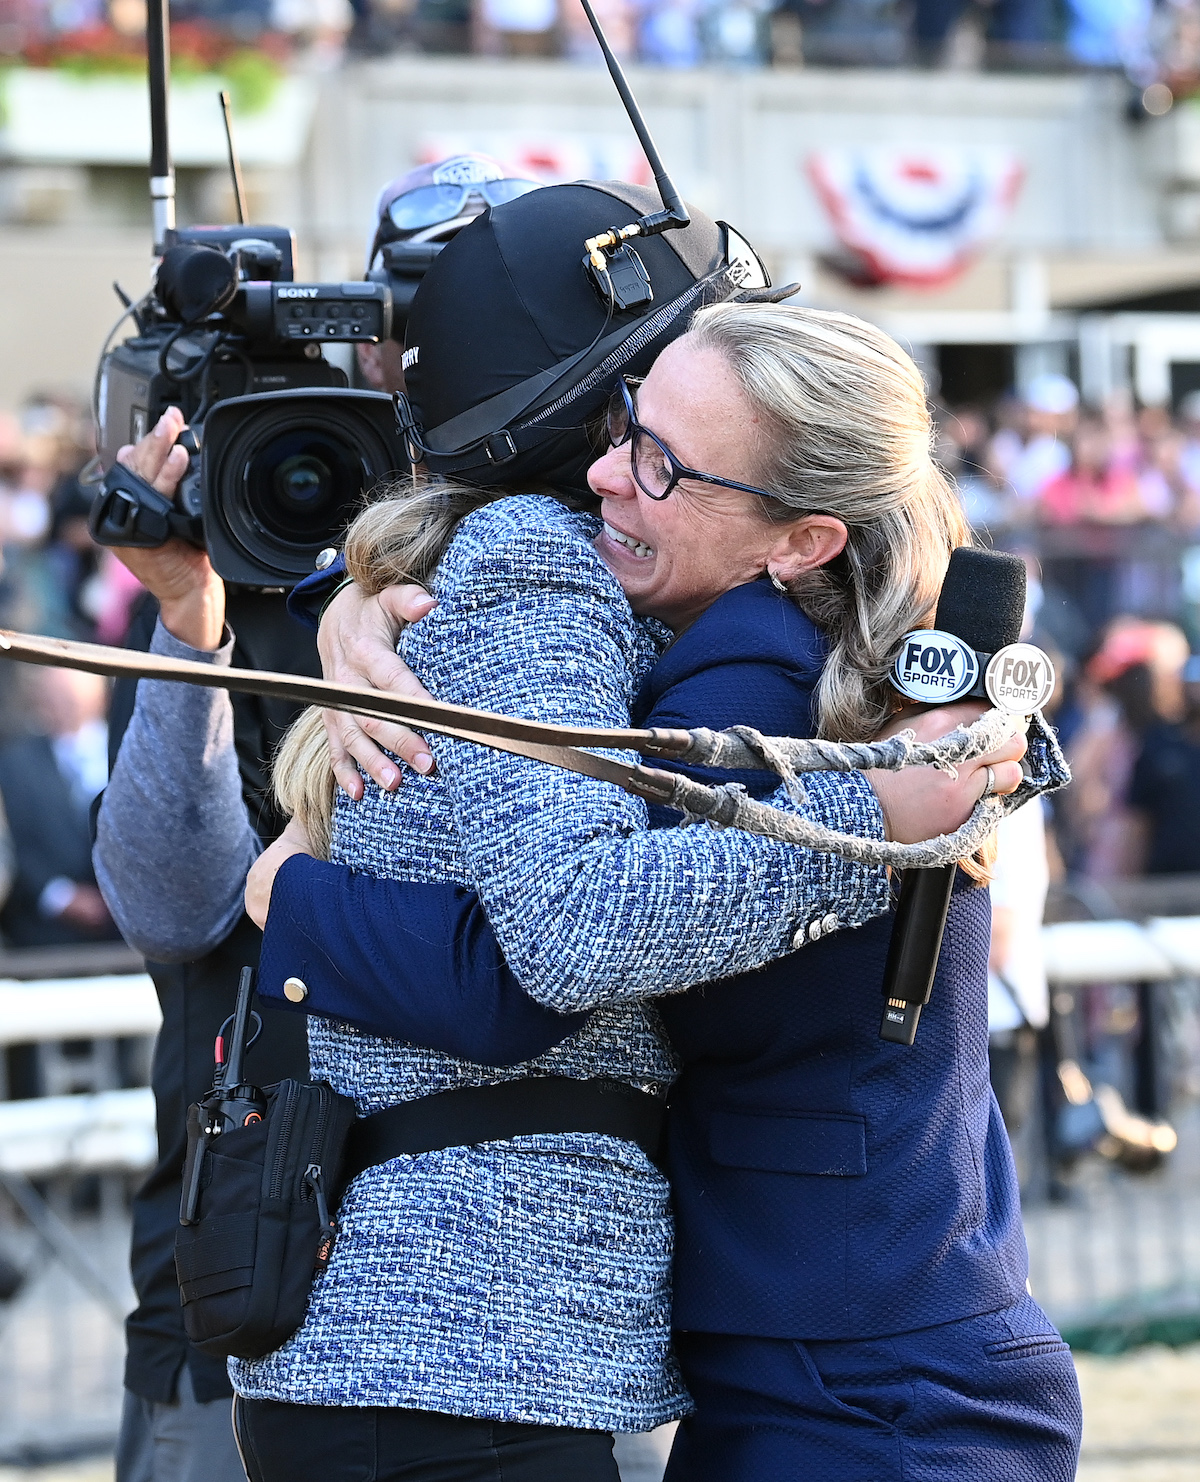 Time for a hug: Jena Antonucci embraces NYRA analyst Maggie Wolfendale after the Belmont. Photo: Susie Raisher (Coglianese/NYRA)